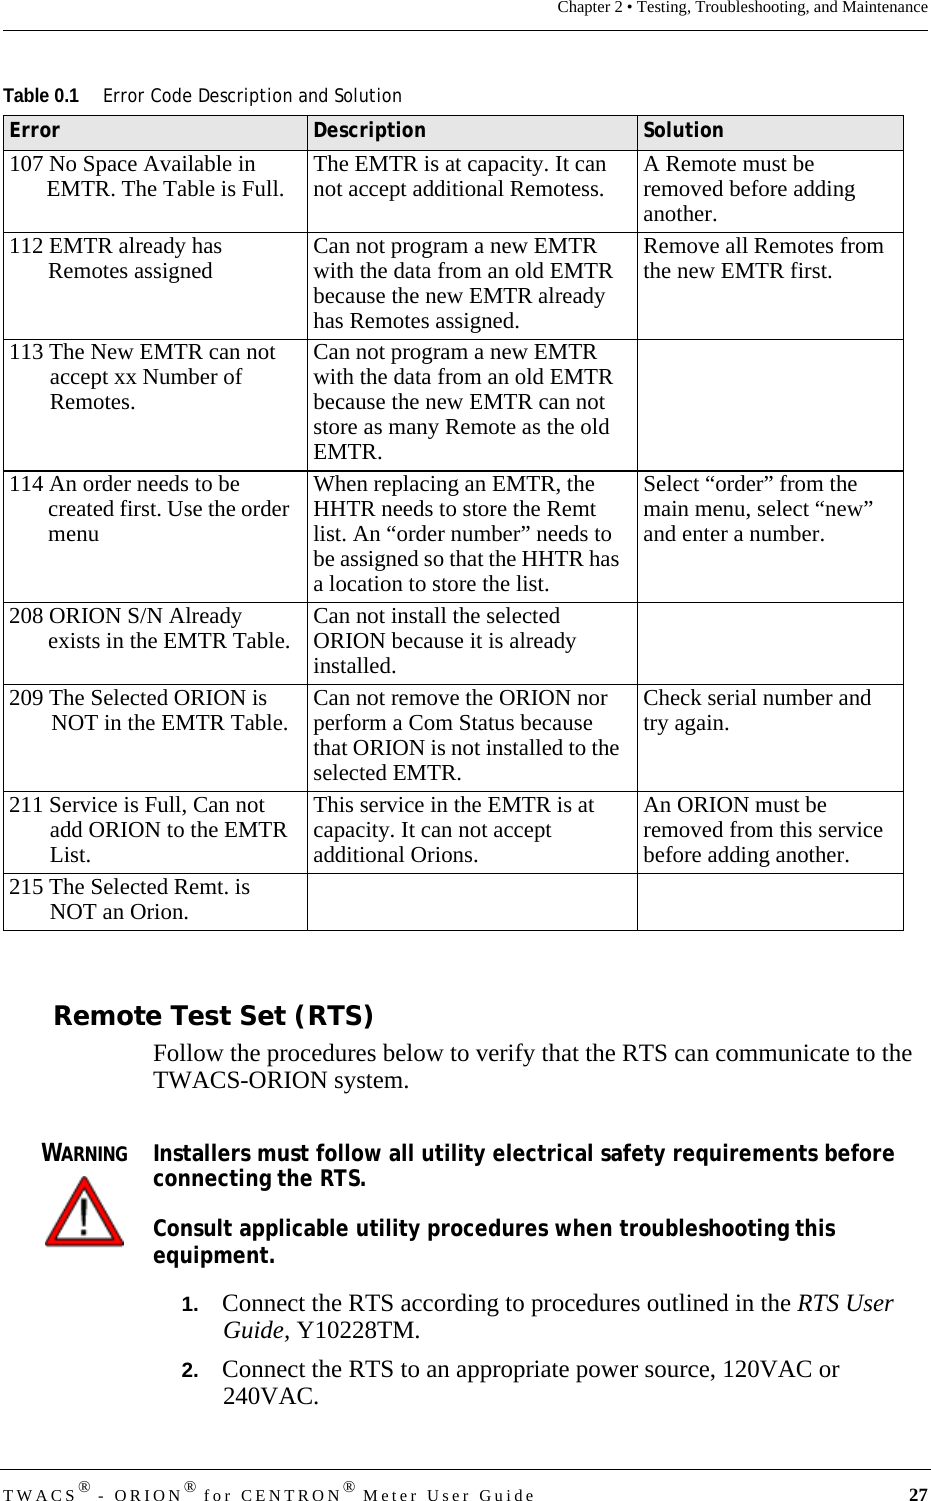 TWACS® - ORION® for CENTRON® Meter User Guide 27Chapter 2 • Testing, Troubleshooting, and MaintenanceRemote Test Set (RTS)Follow the procedures below to verify that the RTS can communicate to the TWACS-ORION system.WARNINGInstallers must follow all utility electrical safety requirements before connecting the RTS.Consult applicable utility procedures when troubleshooting this equipment.1.   Connect the RTS according to procedures outlined in the RTS User Guide, Y10228TM.2.   Connect the RTS to an appropriate power source, 120VAC or 240VAC.107 No Space Available in EMTR. The Table is Full. The EMTR is at capacity. It can not accept additional Remotess.  A Remote must be removed before adding another.112 EMTR already has Remotes assigned Can not program a new EMTR with the data from an old EMTR because the new EMTR already has Remotes assigned. Remove all Remotes from the new EMTR first.113 The New EMTR can not accept xx Number of Remotes.Can not program a new EMTR with the data from an old EMTR because the new EMTR can not store as many Remote as the old EMTR.114 An order needs to be created first. Use the order menuWhen replacing an EMTR, the HHTR needs to store the Remt list. An “order number” needs to be assigned so that the HHTR has a location to store the list. Select “order” from the main menu, select “new” and enter a number.208 ORION S/N Already exists in the EMTR Table. Can not install the selected ORION because it is already installed.209 The Selected ORION is NOT in the EMTR Table. Can not remove the ORION nor perform a Com Status because that ORION is not installed to the selected EMTR. Check serial number and try again.211 Service is Full, Can not add ORION to the EMTR List.This service in the EMTR is at capacity. It can not accept additional Orions.An ORION must be removed from this service before adding another.215 The Selected Remt. is NOT an Orion.Table 0.1Error Code Description and SolutionError Description Solution